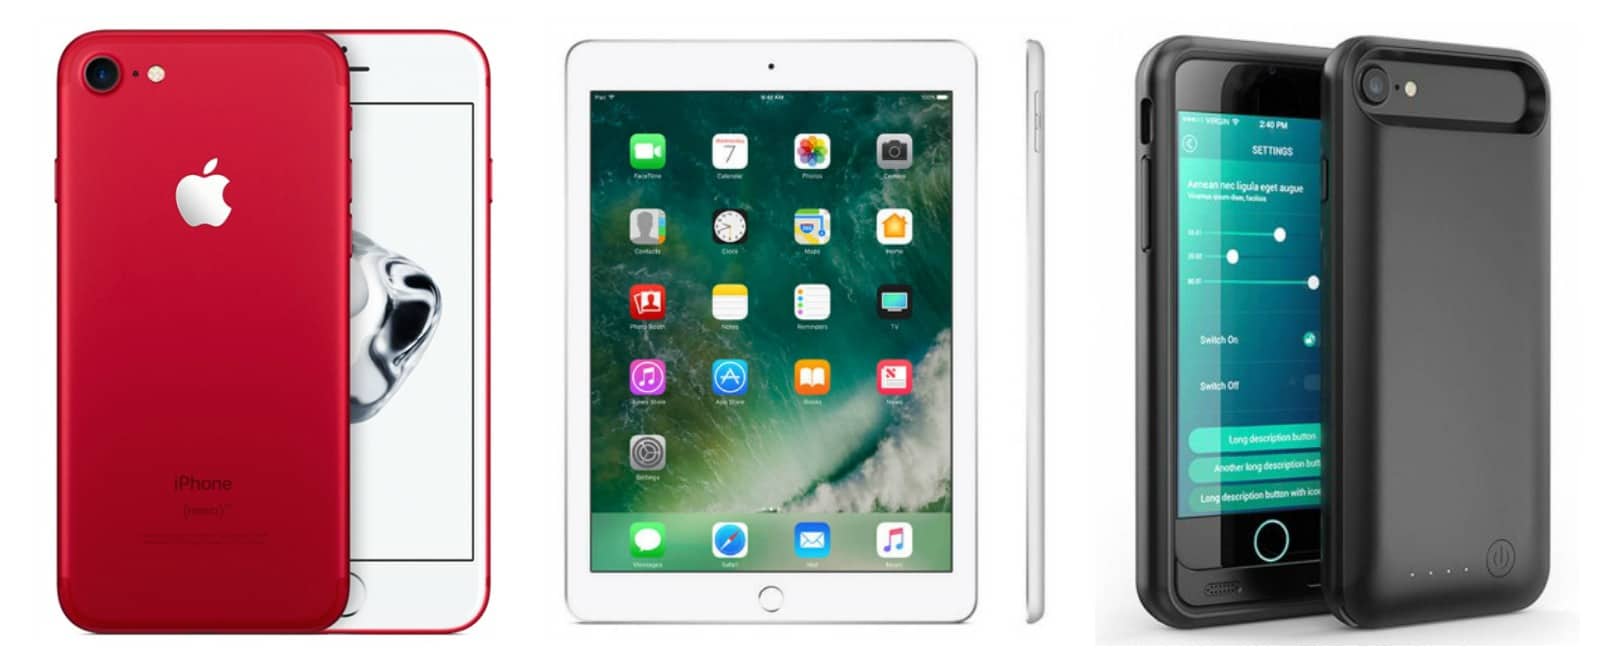 Week S Best Apple Deals Get Great Prices On Iphones Ipads And Wireless Cult Of Mac